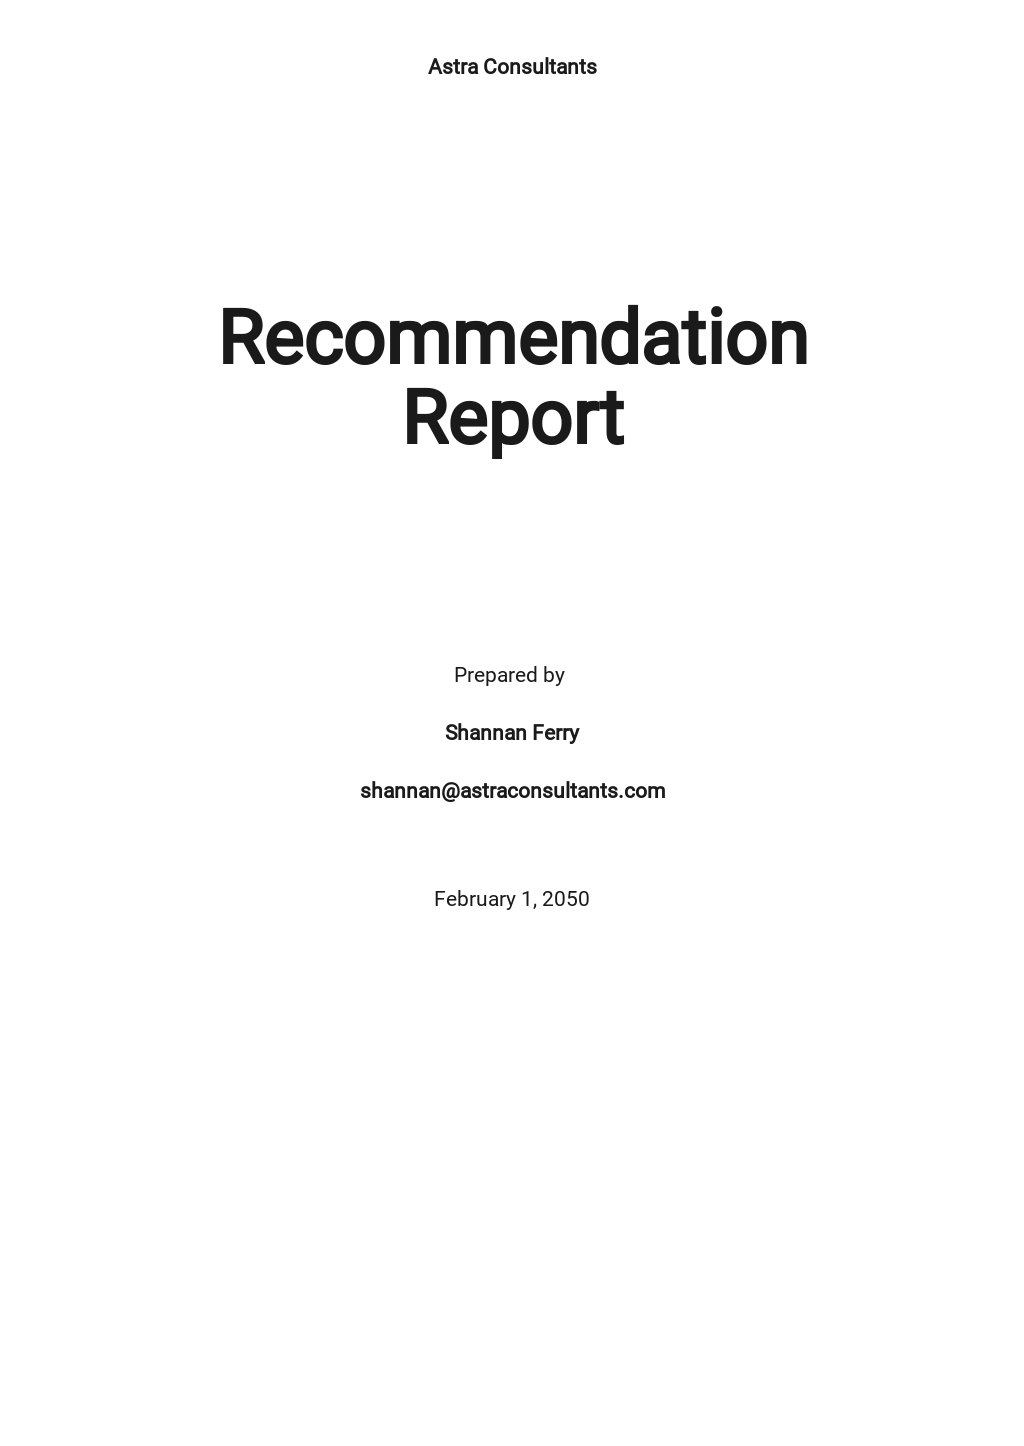 Recommendation Report Template.jpe